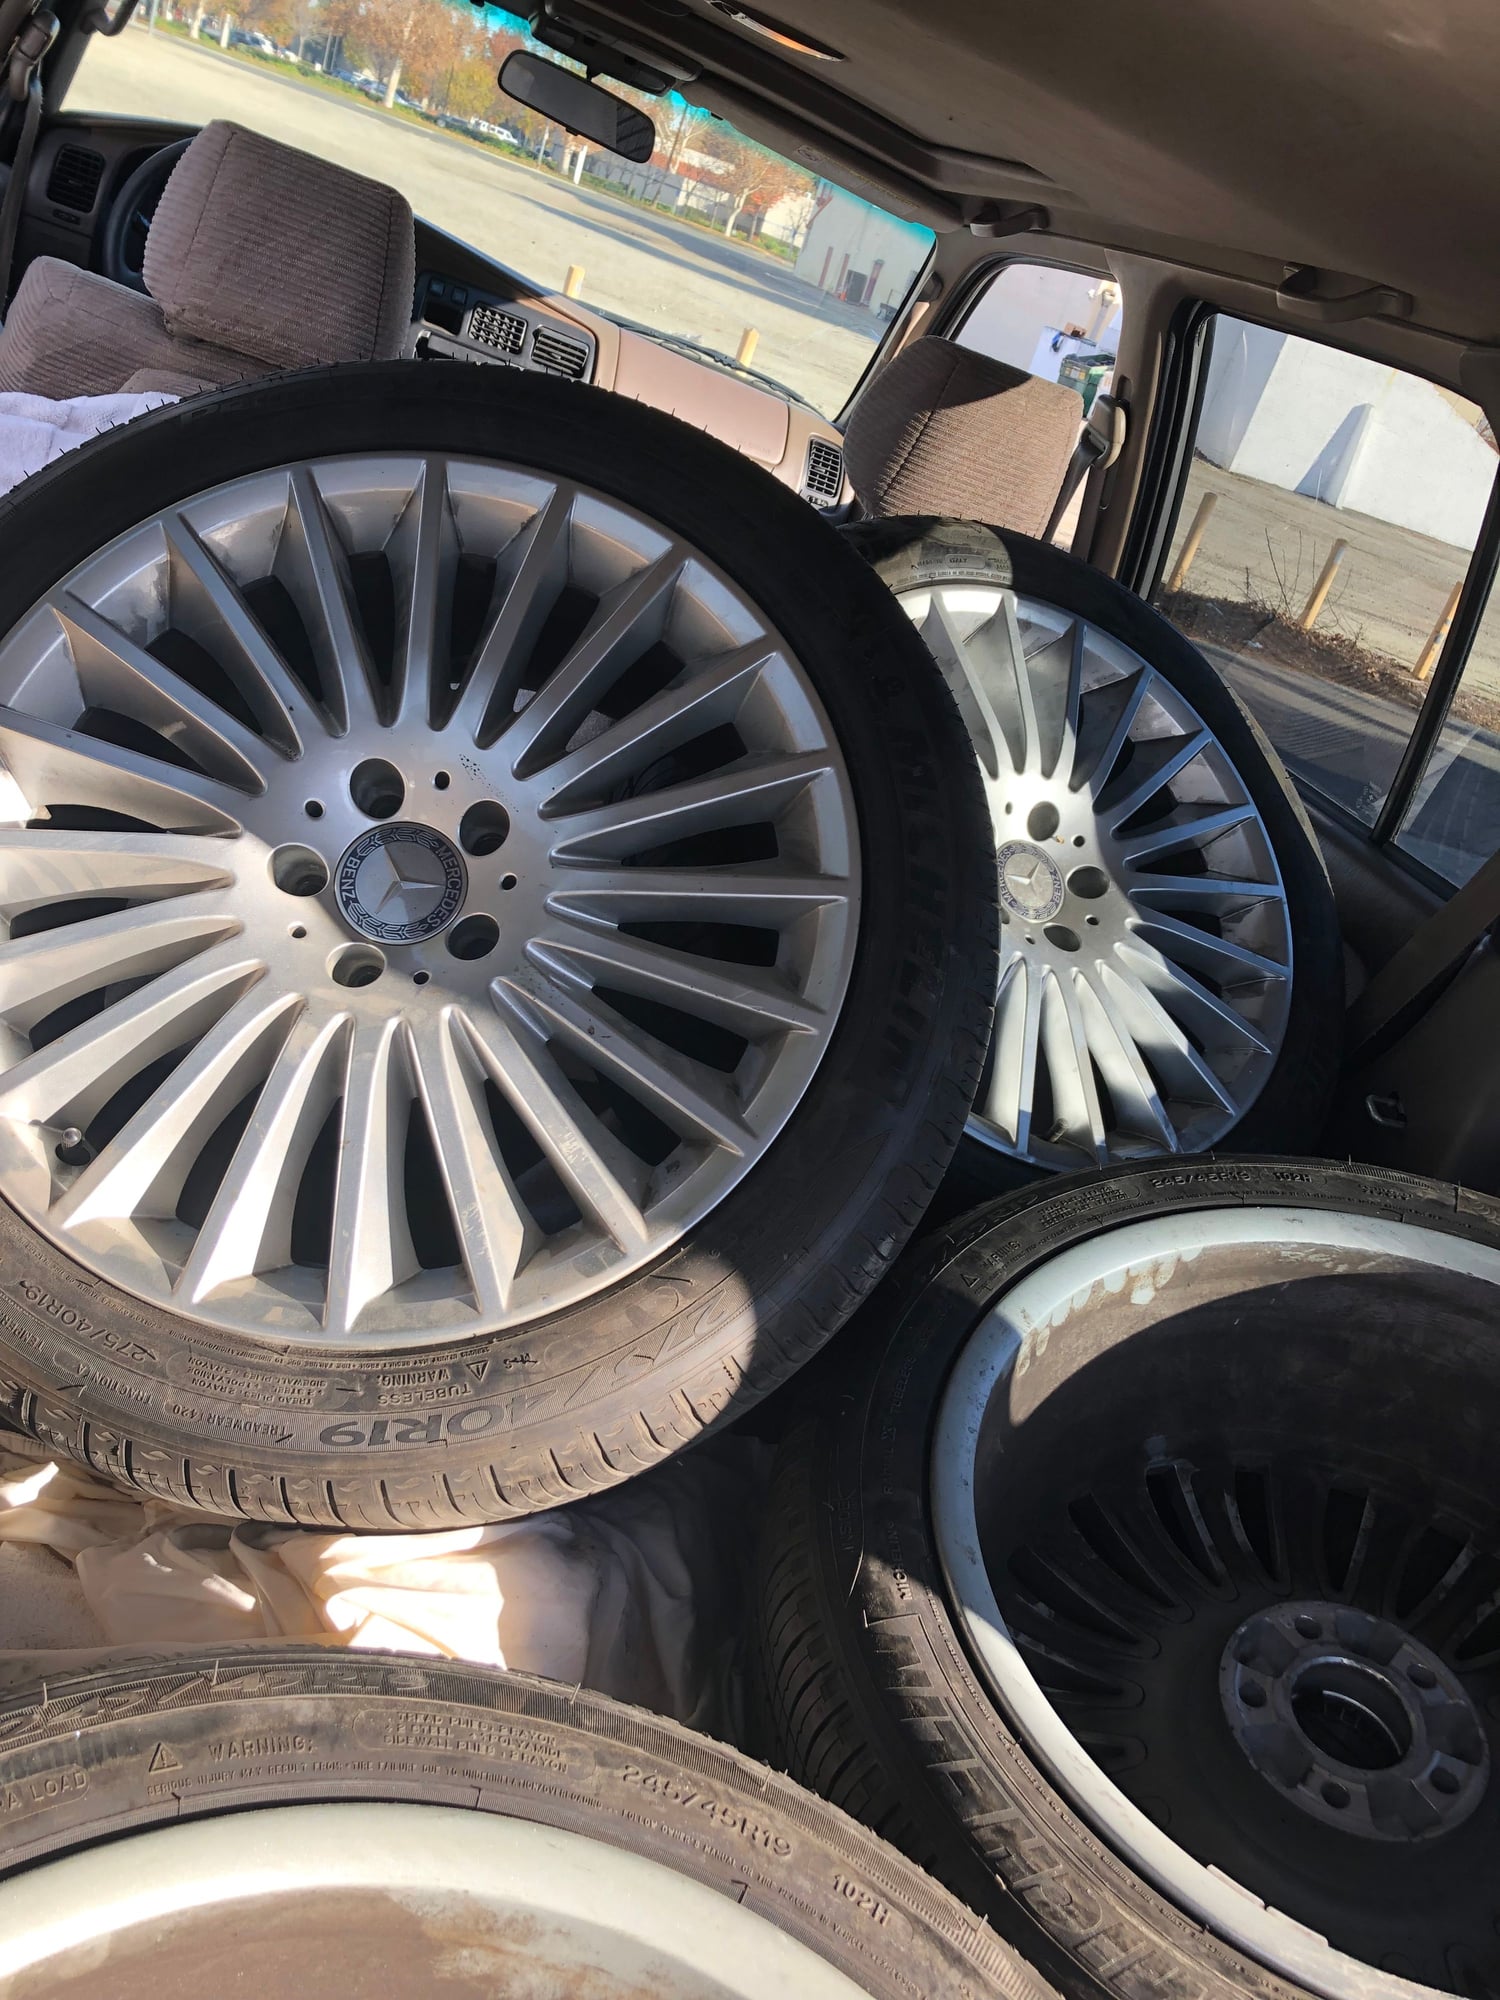 Wheels and Tires/Axles - 2006 e55 Amg + 2018 s600 wheels and tires for sale! - New - Huntington Beach, CA 90742, United States